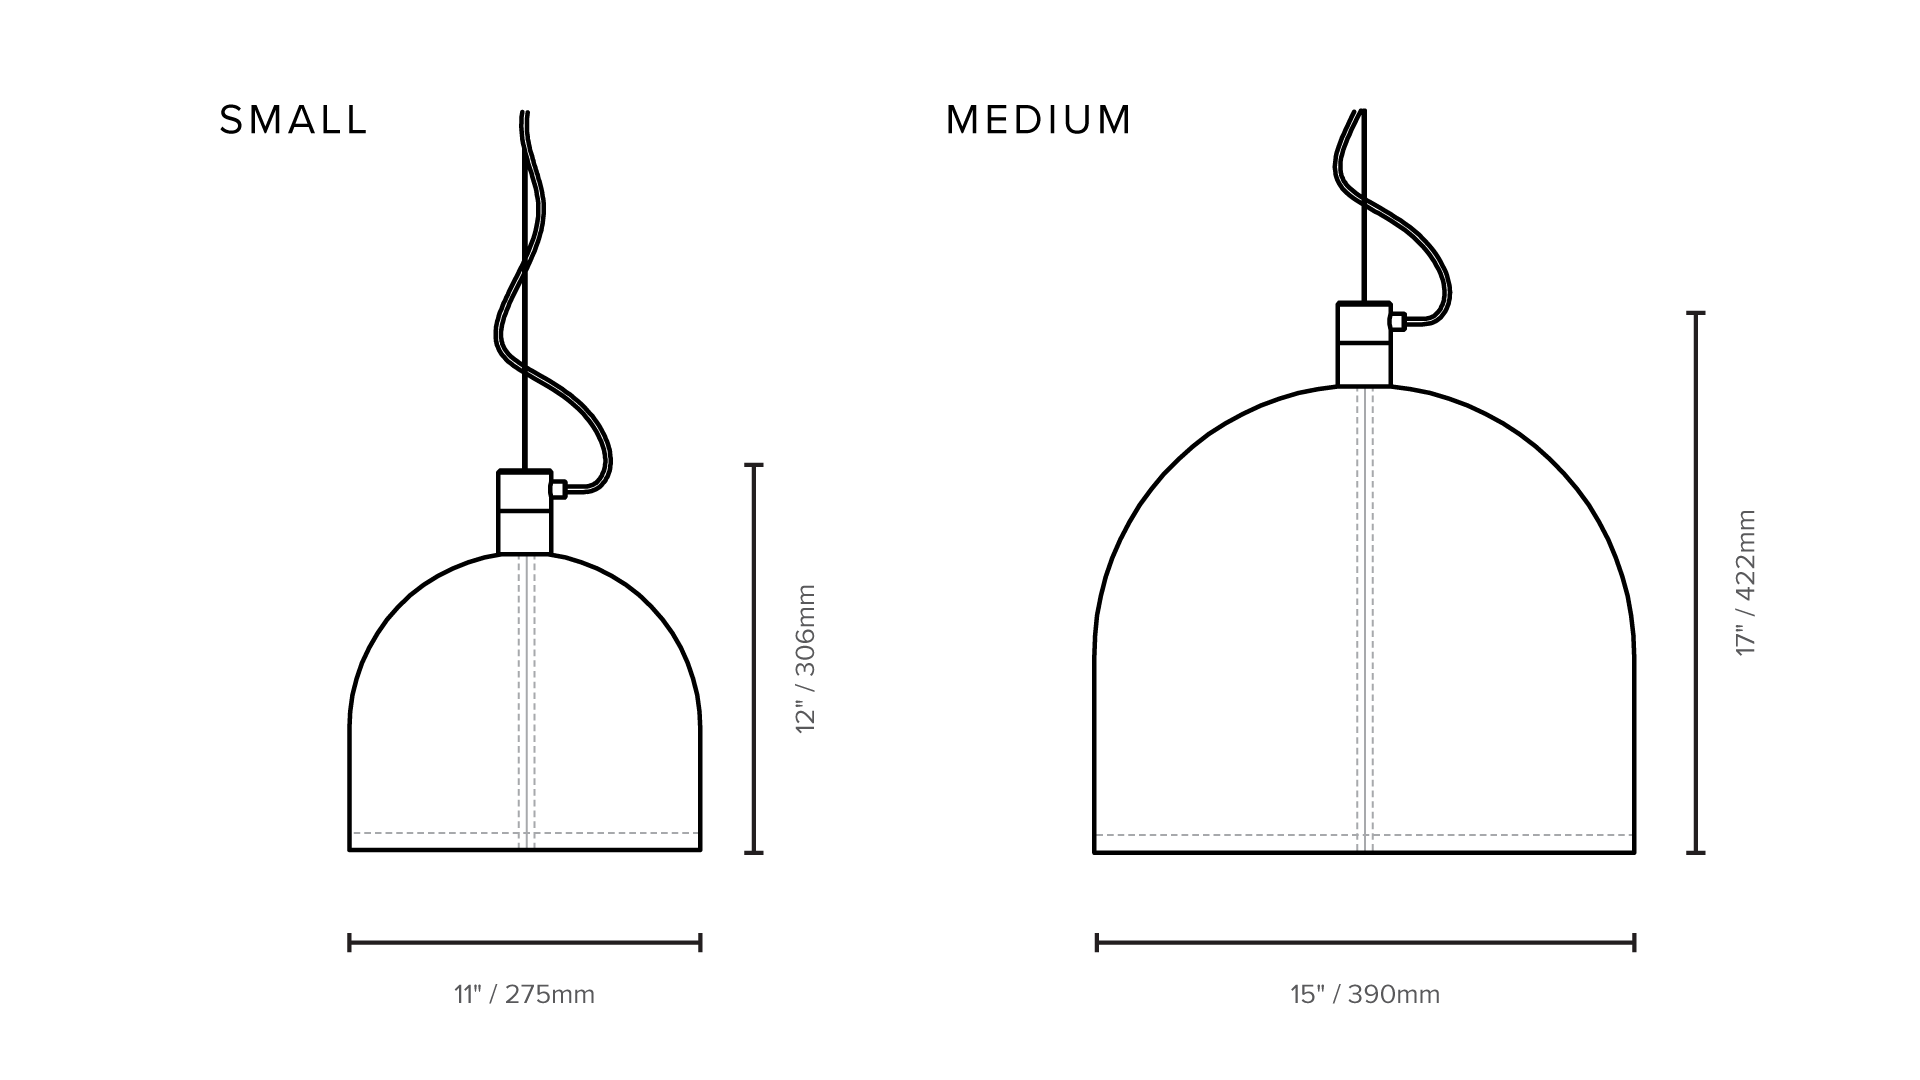 Product size diagram